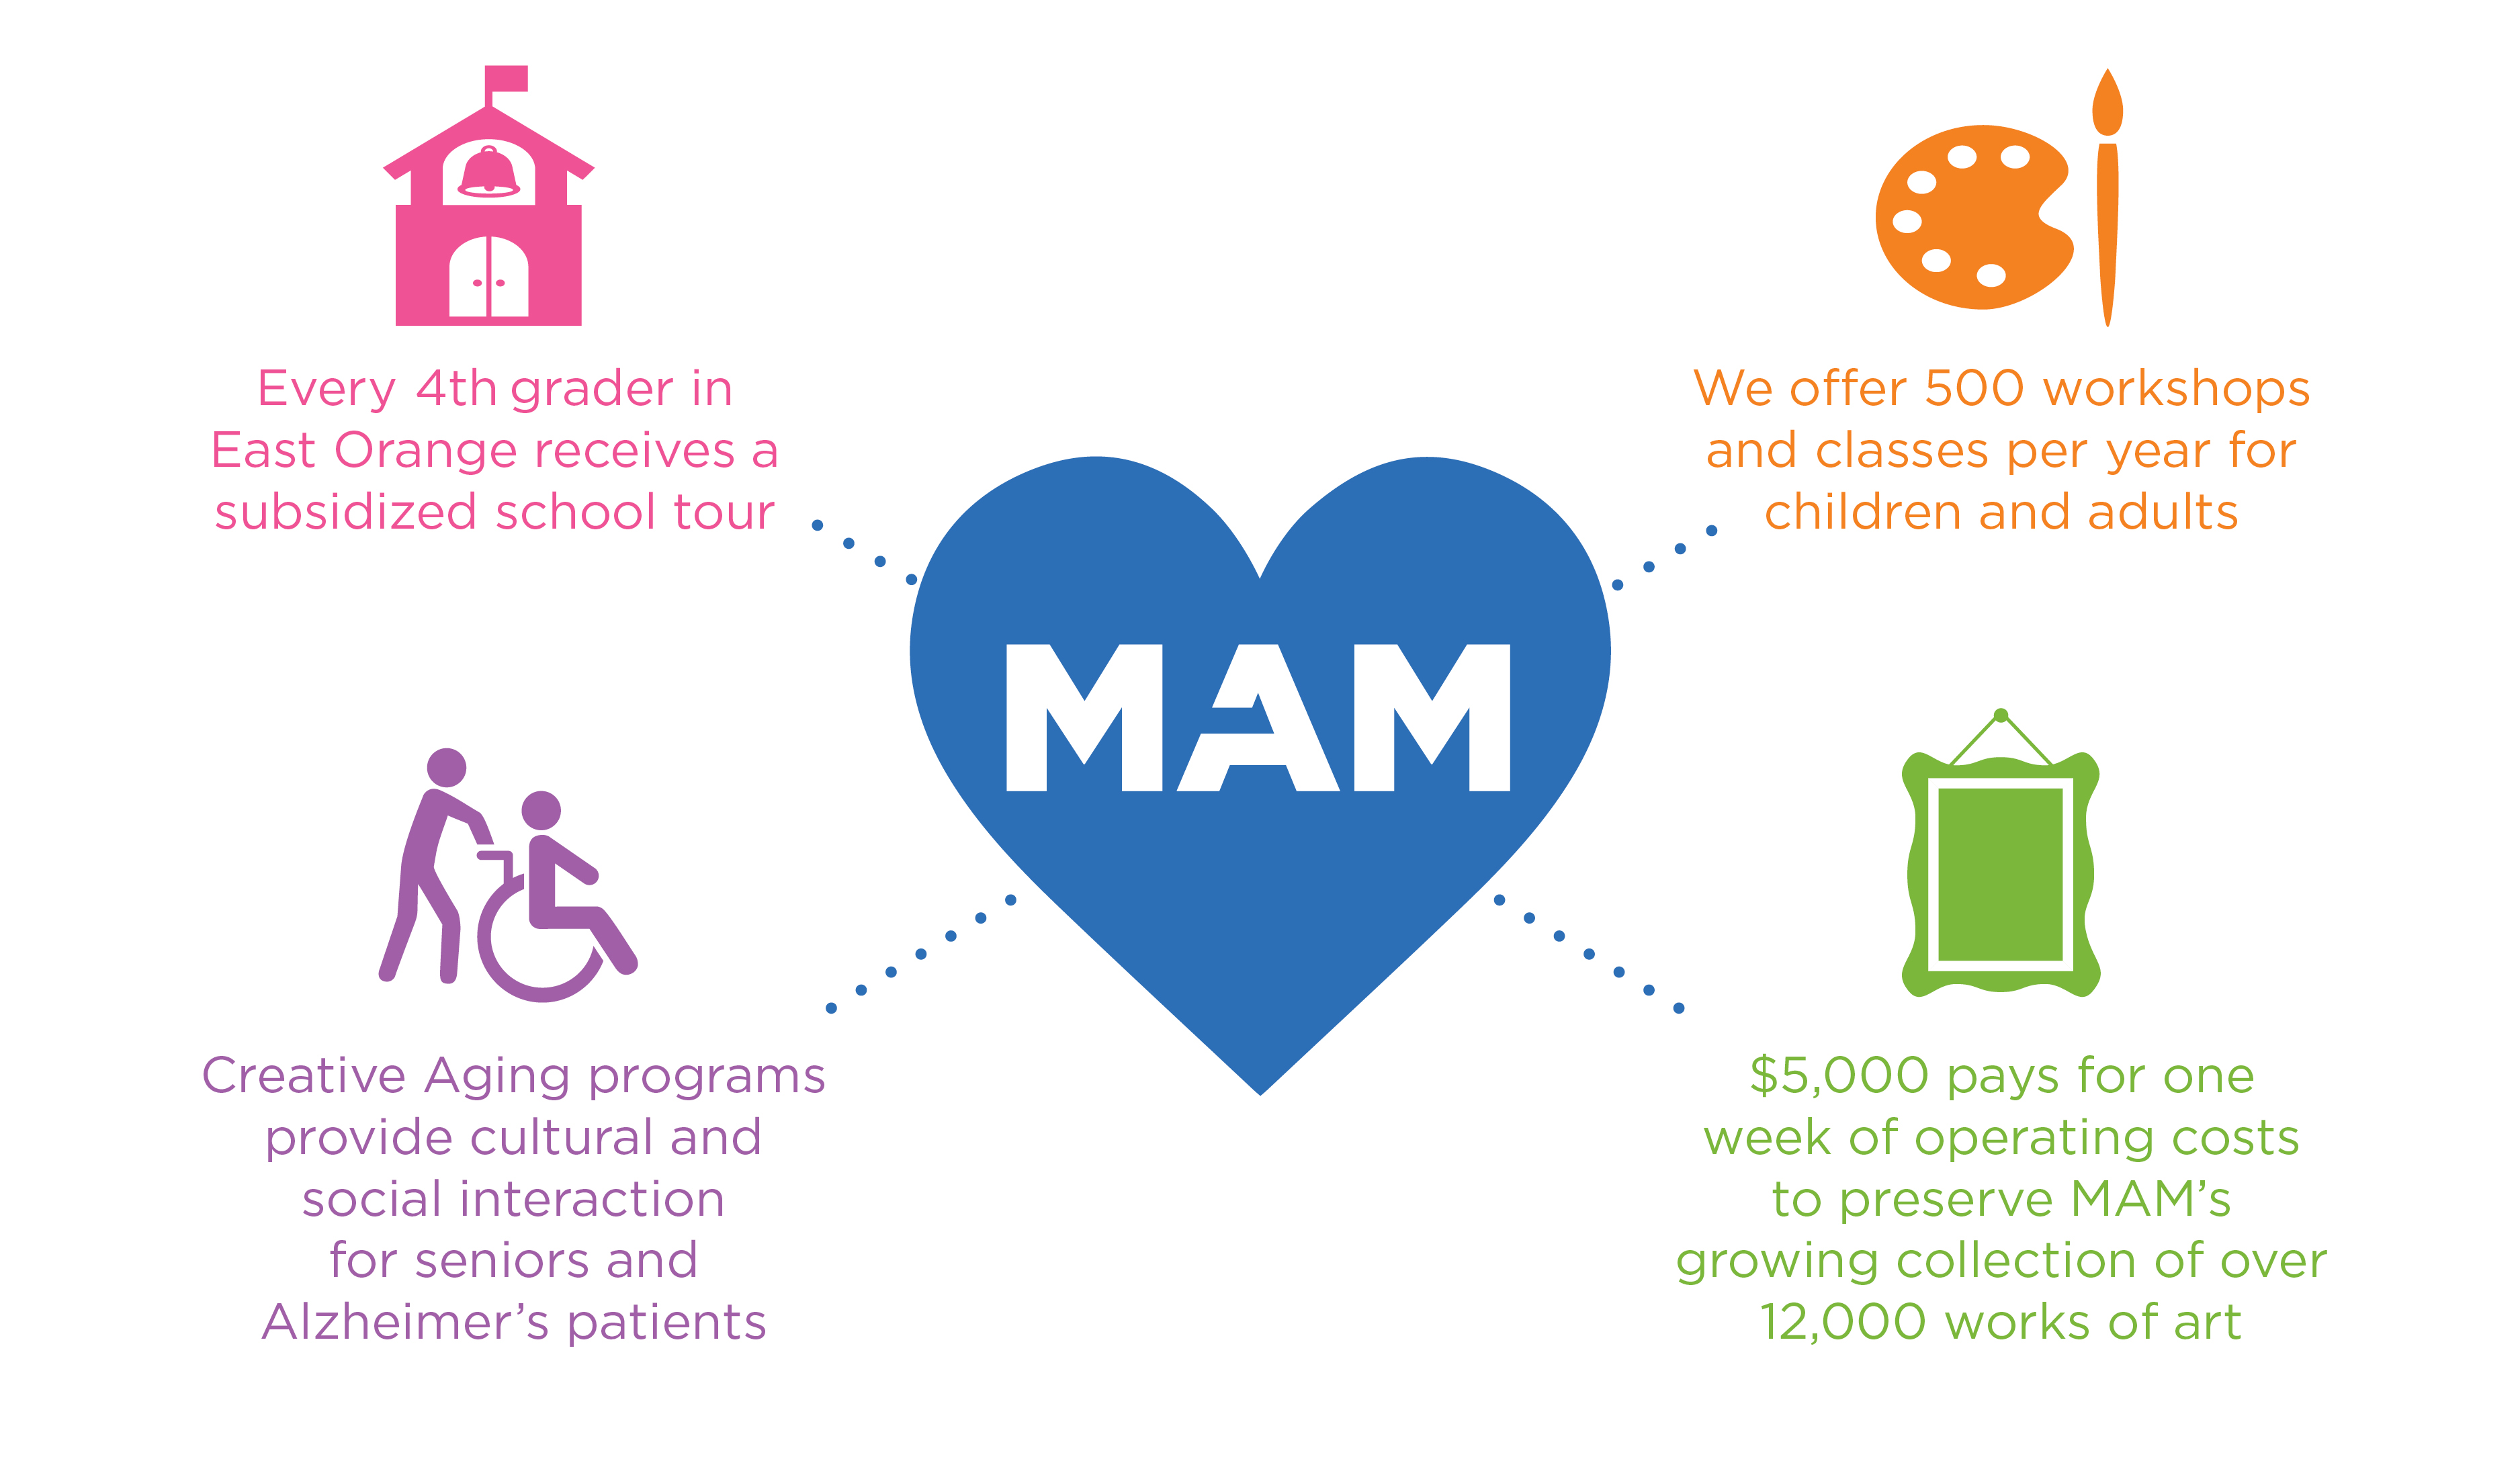 An infographic about programs Montclair Art Museum provides. Includes text: every fourth grader in East Orange receives a subsidized school; creative aging programs provide cultural and social interaction for seniors and Alzheimer's patients; we offer 500 workshops and classes per year for children and adults; $5,000 pays for one week of operating costs to preserve MAM's growing collection of over 12,000 works of art.